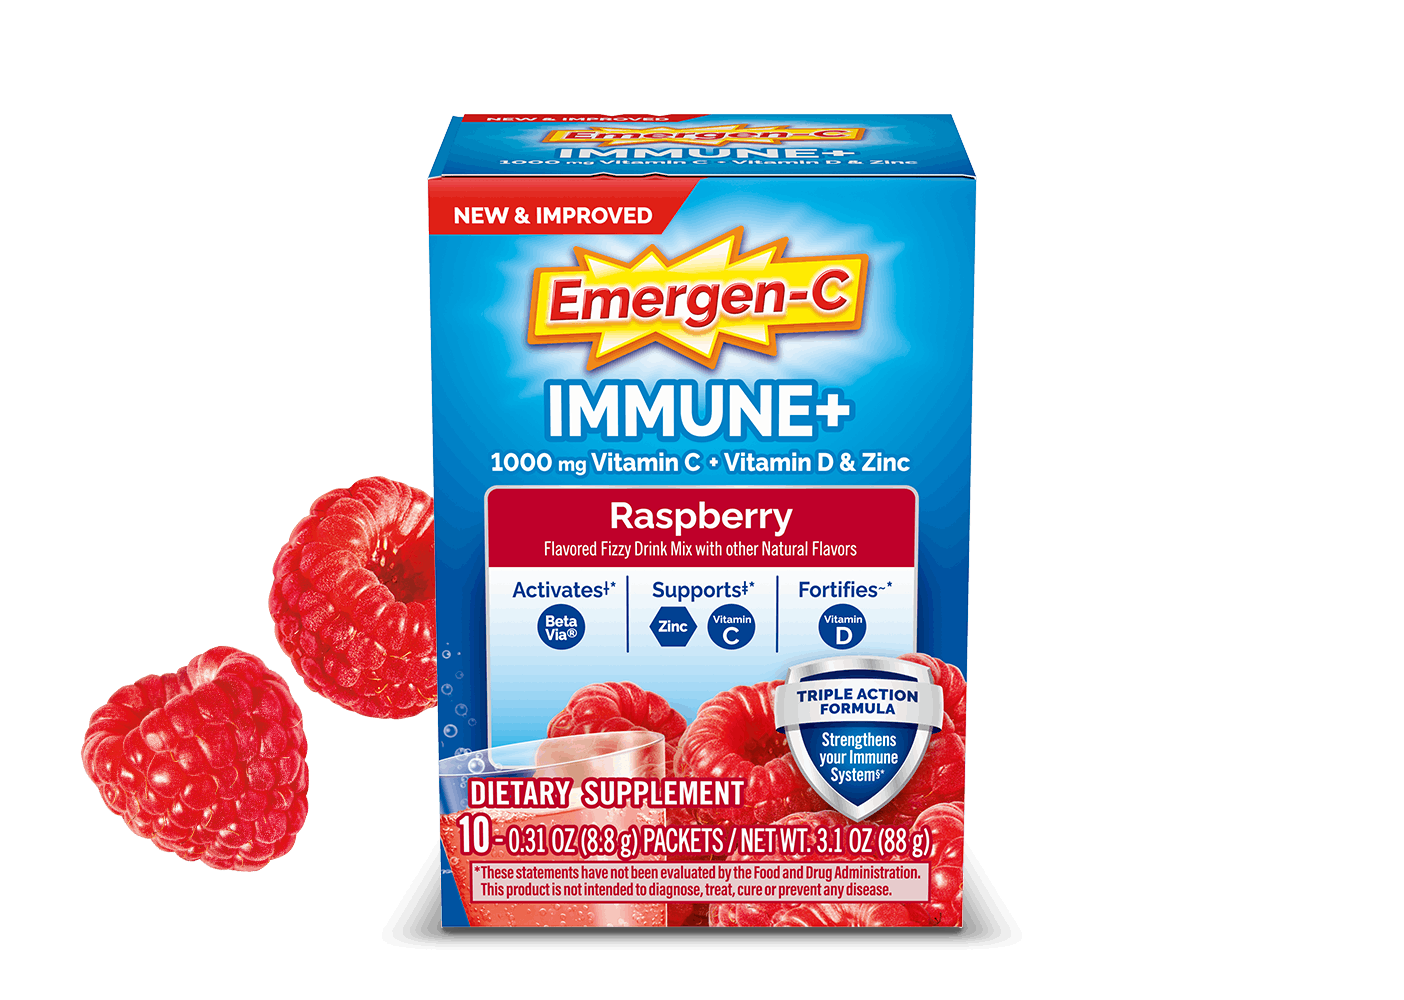 Emergen-C Immune+ Raspberry with Triple Action product